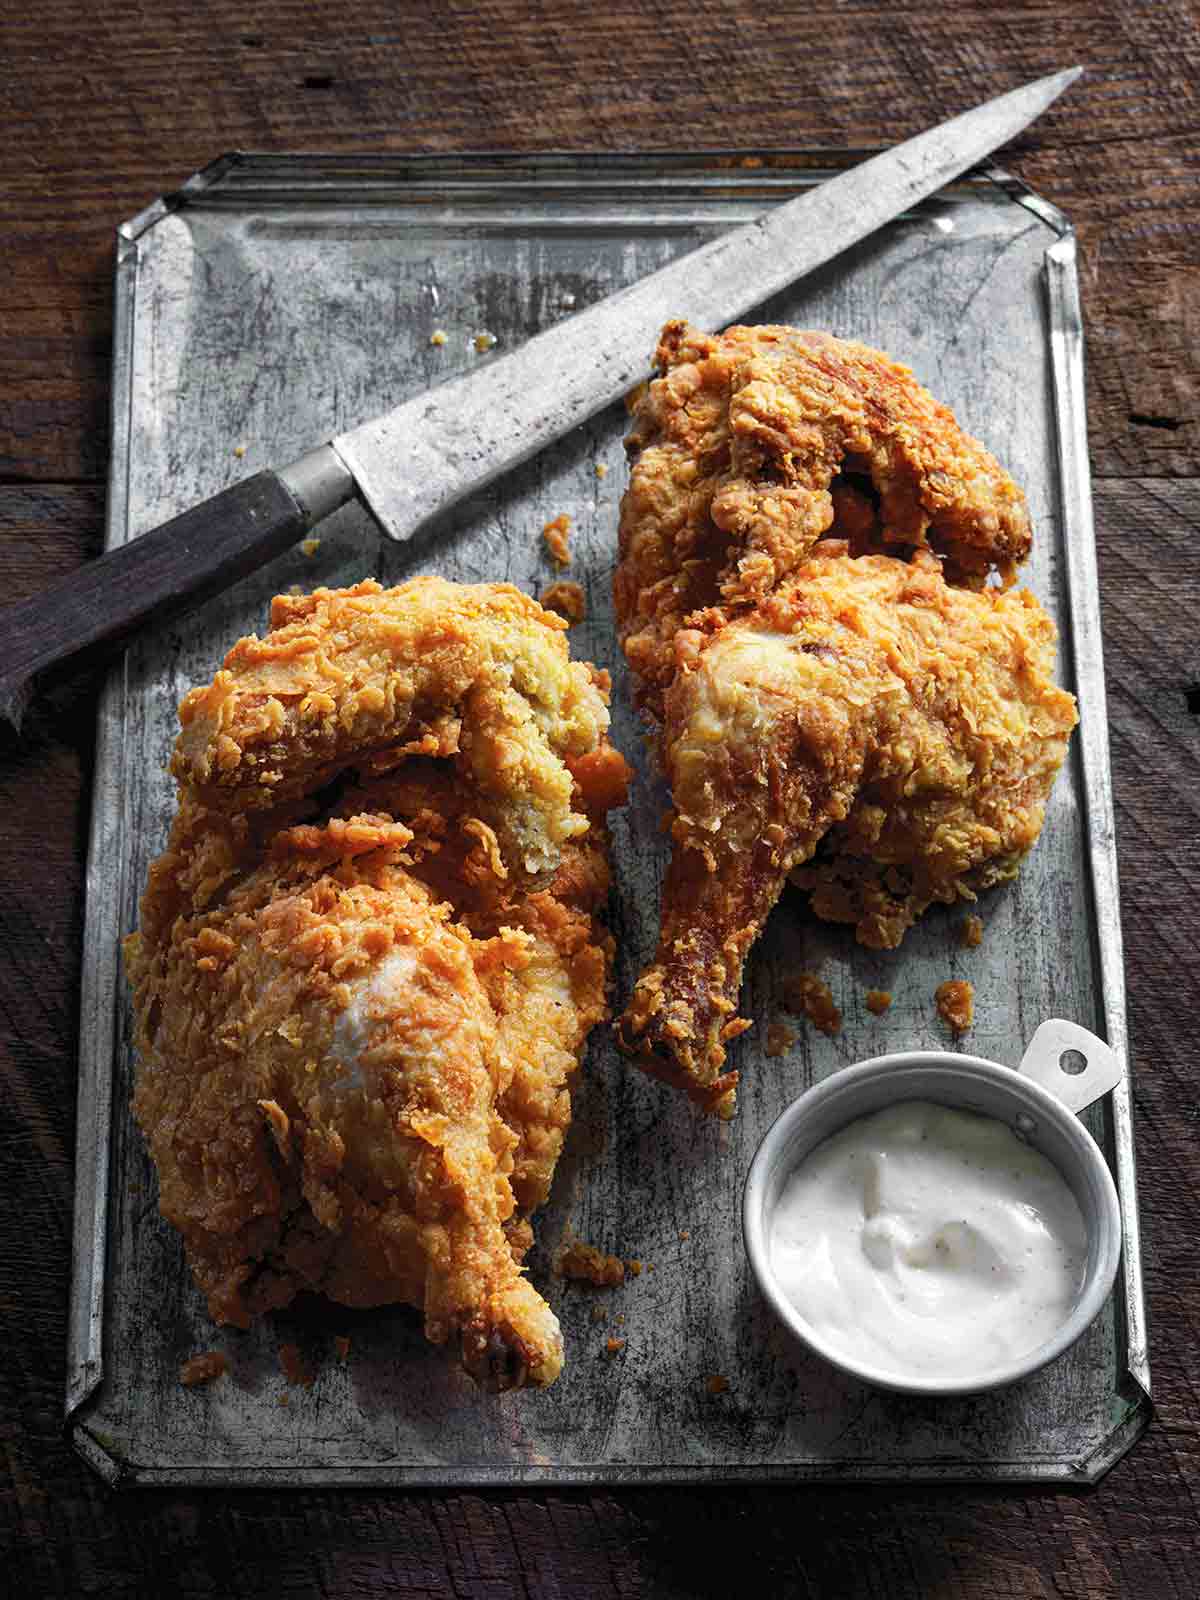 Two pieces of cornmeal-crusted fried chicken with white barbecue sauce and a knife on a metal sheet.